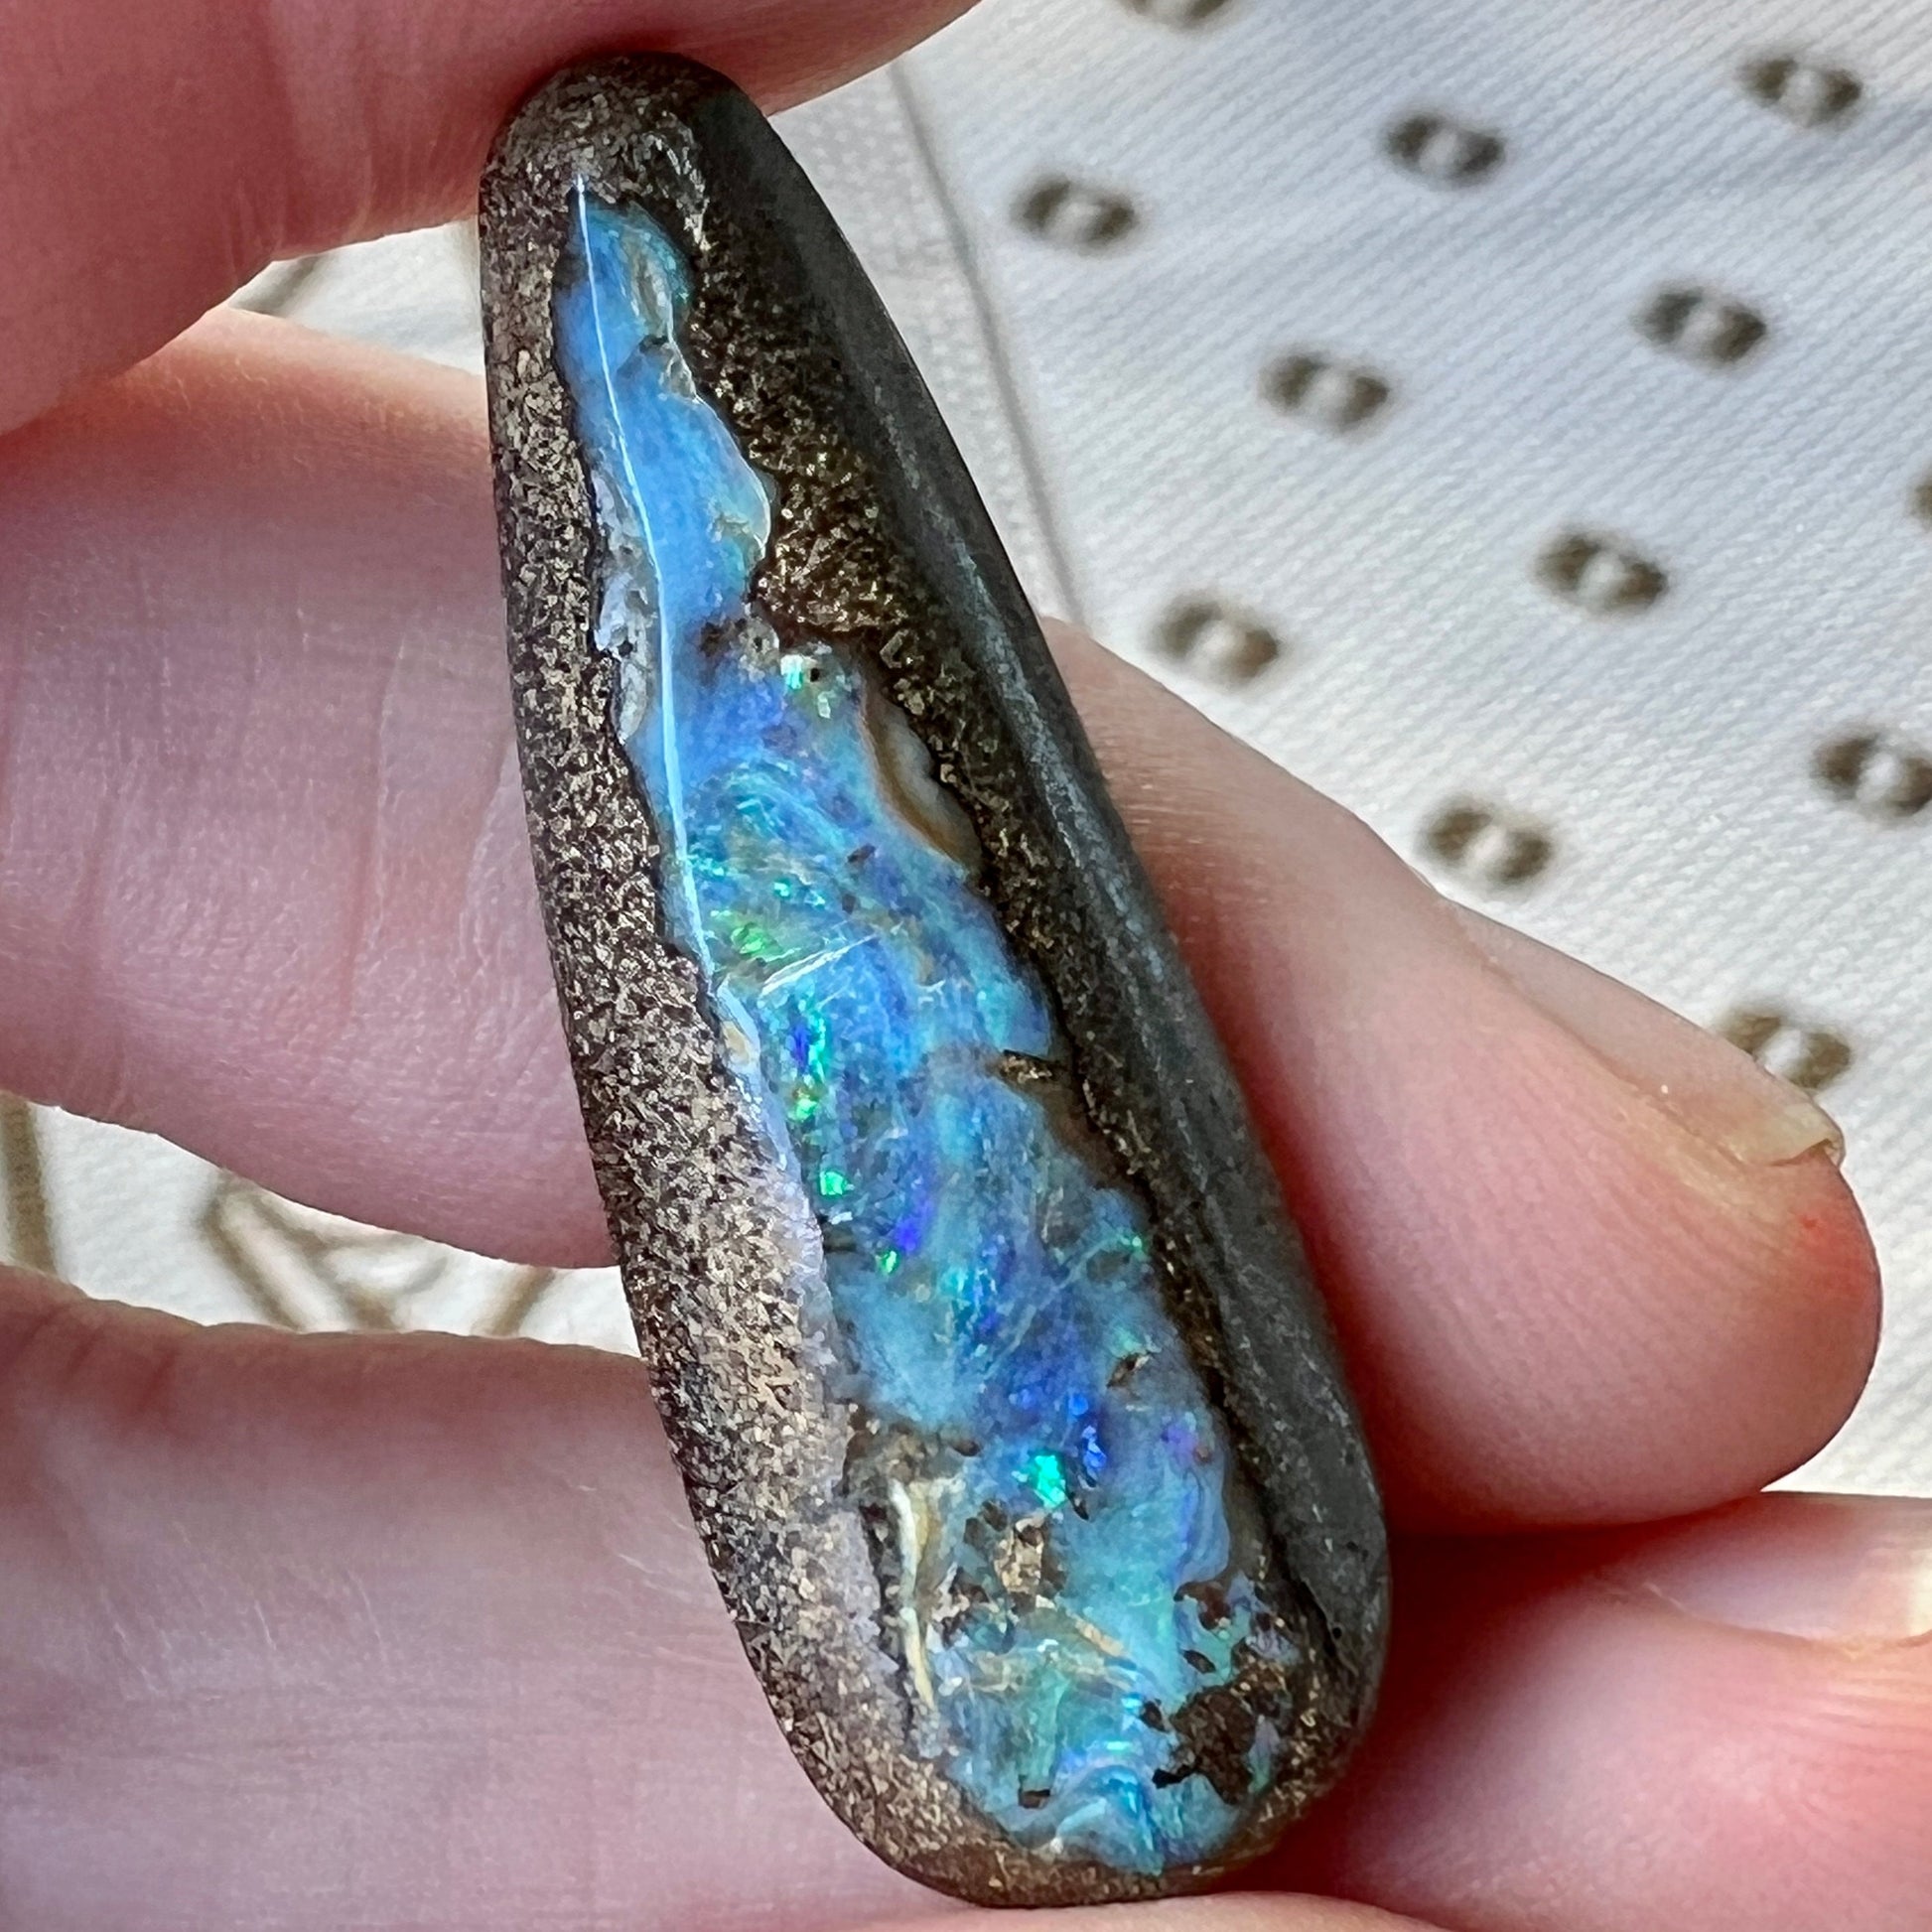 Boulder opal from Opalton. Another great pendant piece. Ready to go